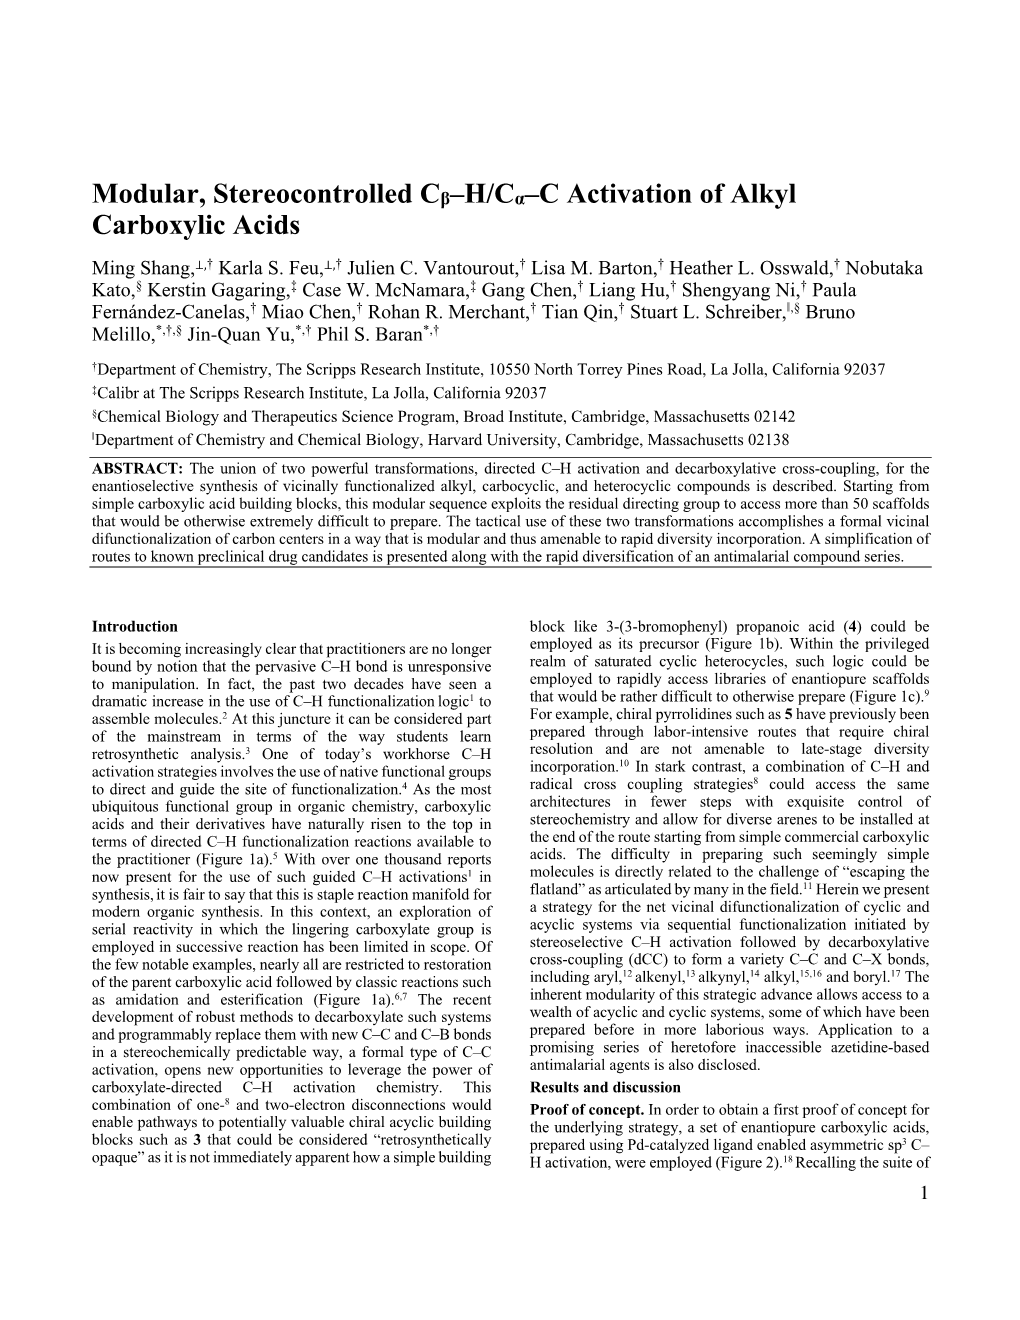 Modular, Stereocontrolled Cβ–H/Cα–C Activation of Alkyl Carboxylic Acids Ming Shang,⊥,† Karla S